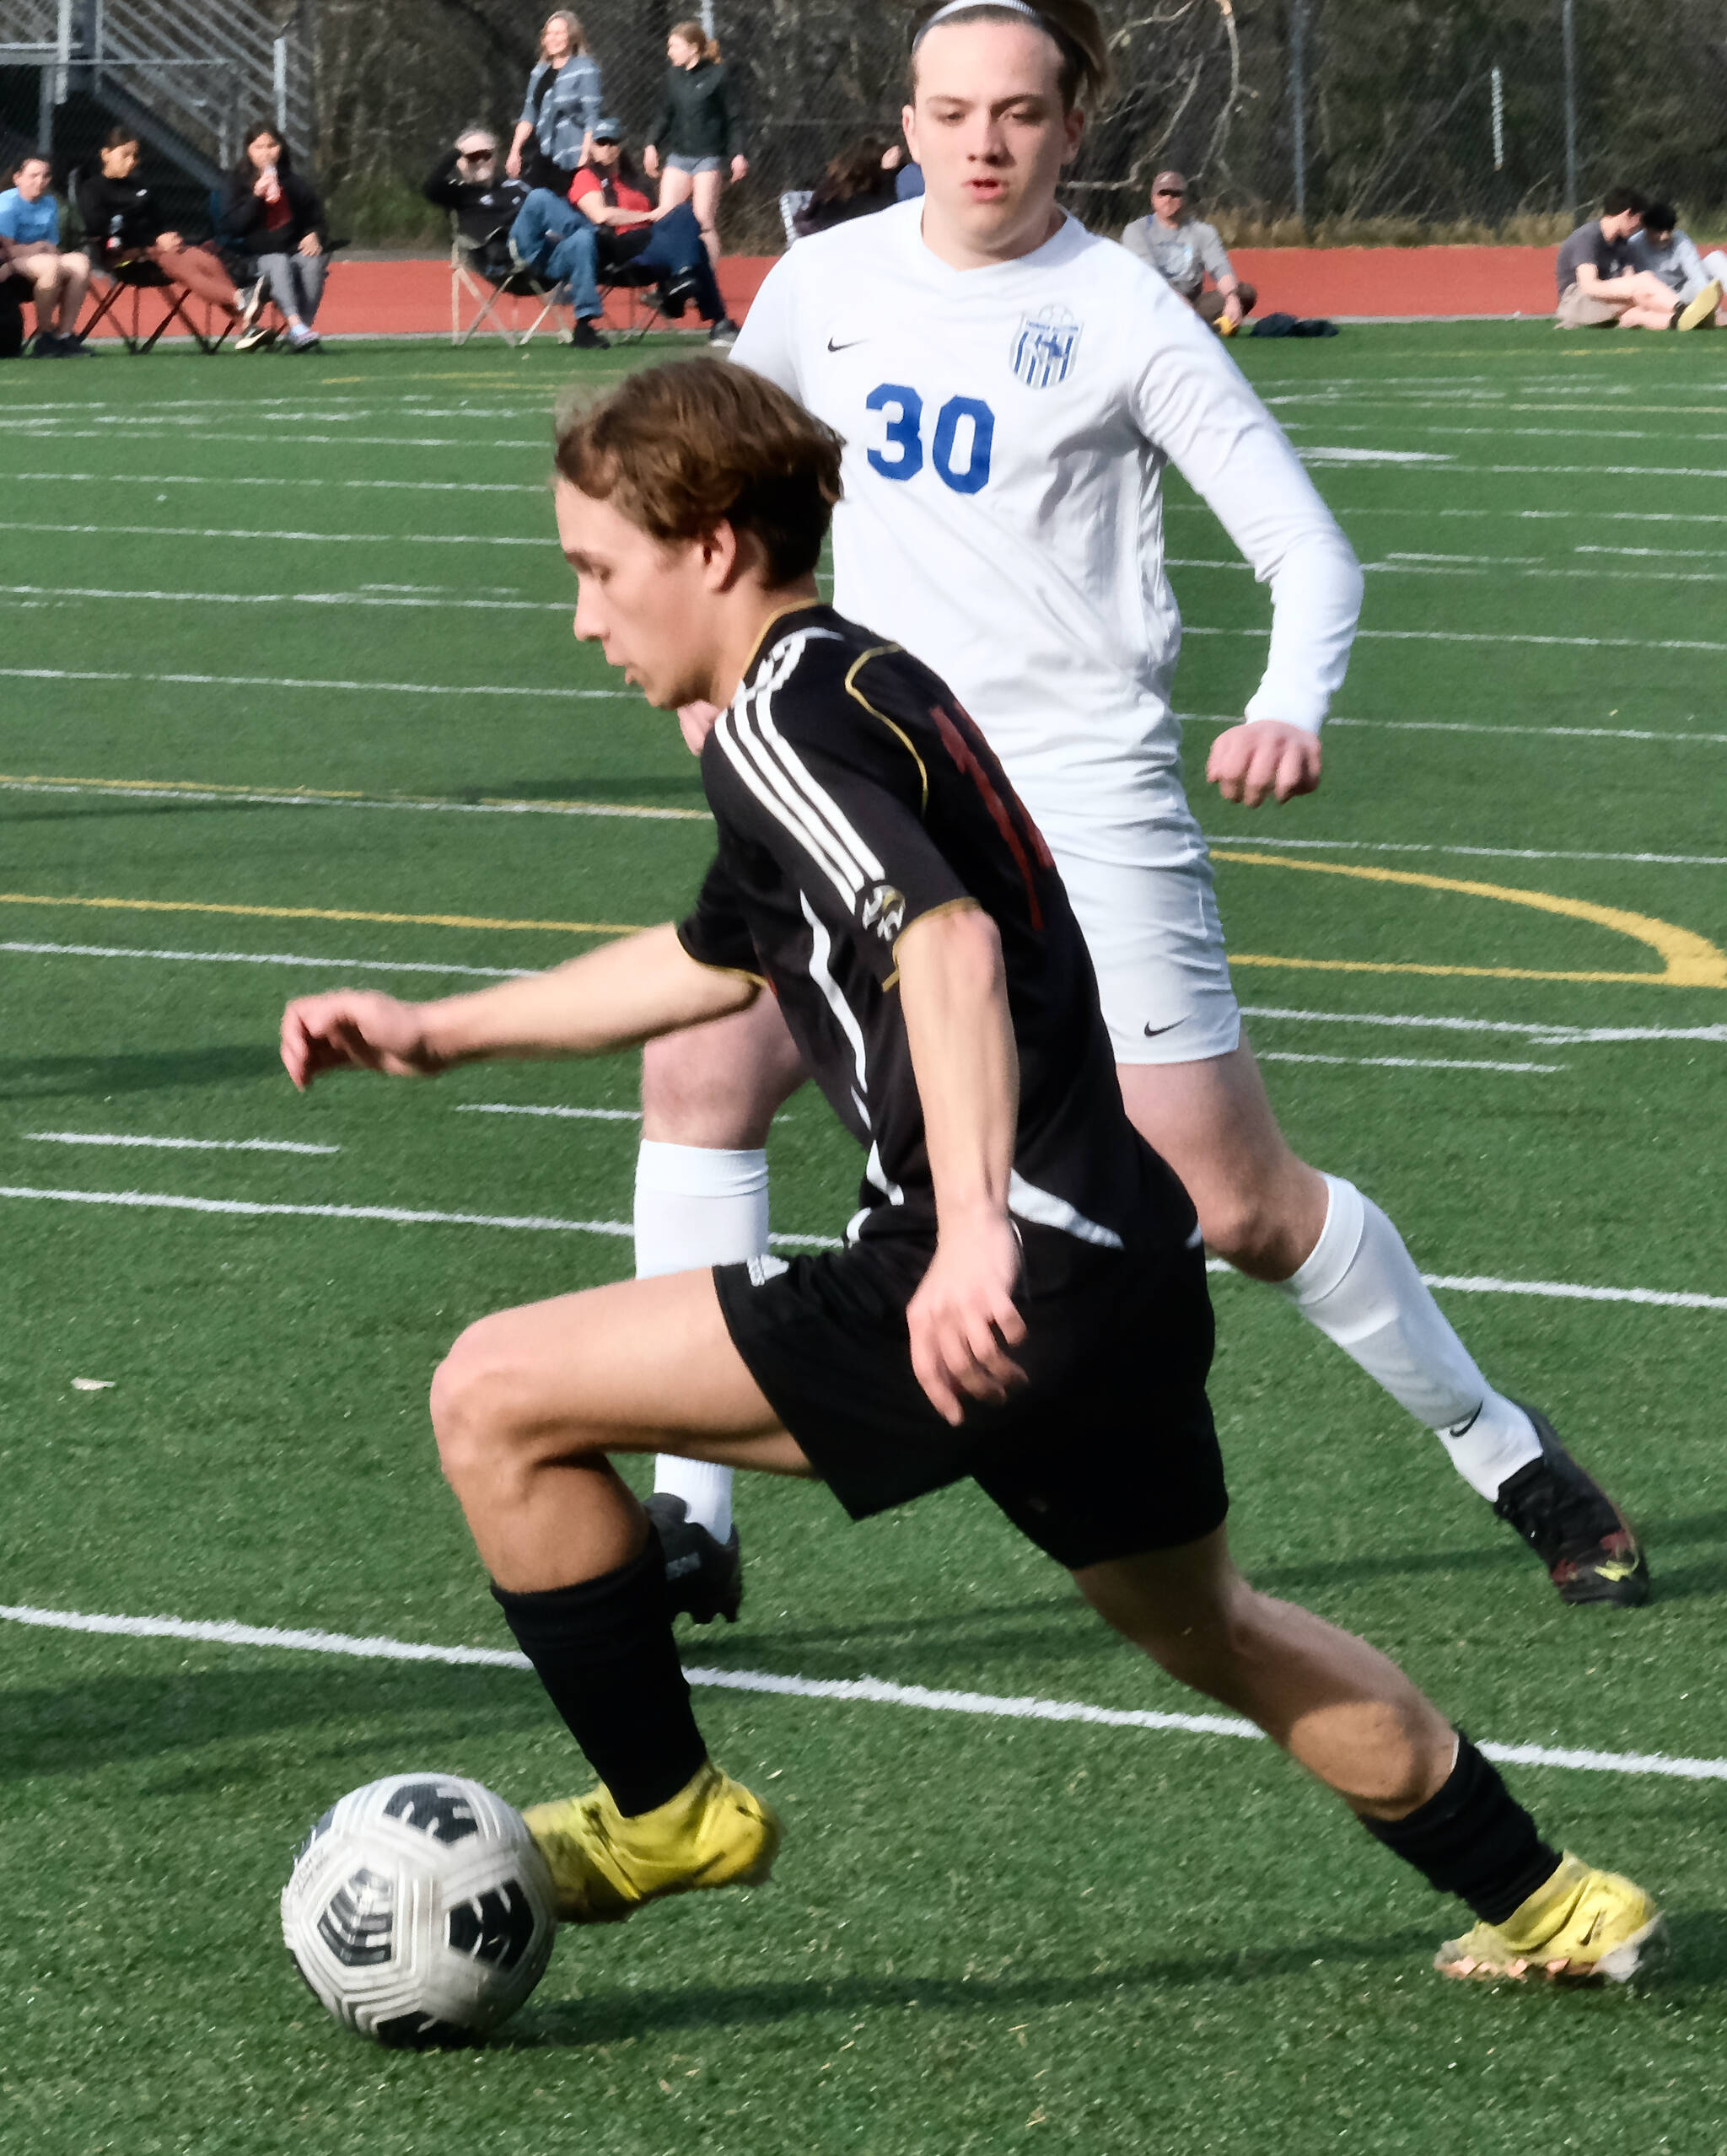 Juneau-Douglas High School: Yadaa.at Kalé sophomore Kai Ciambor, shown in earlier season action, had two goals and controlled the pitch for the Crimson Bears during their final two regular season games at Ketchikan last weekend. (Klas Stolpe / Juneau Empire)